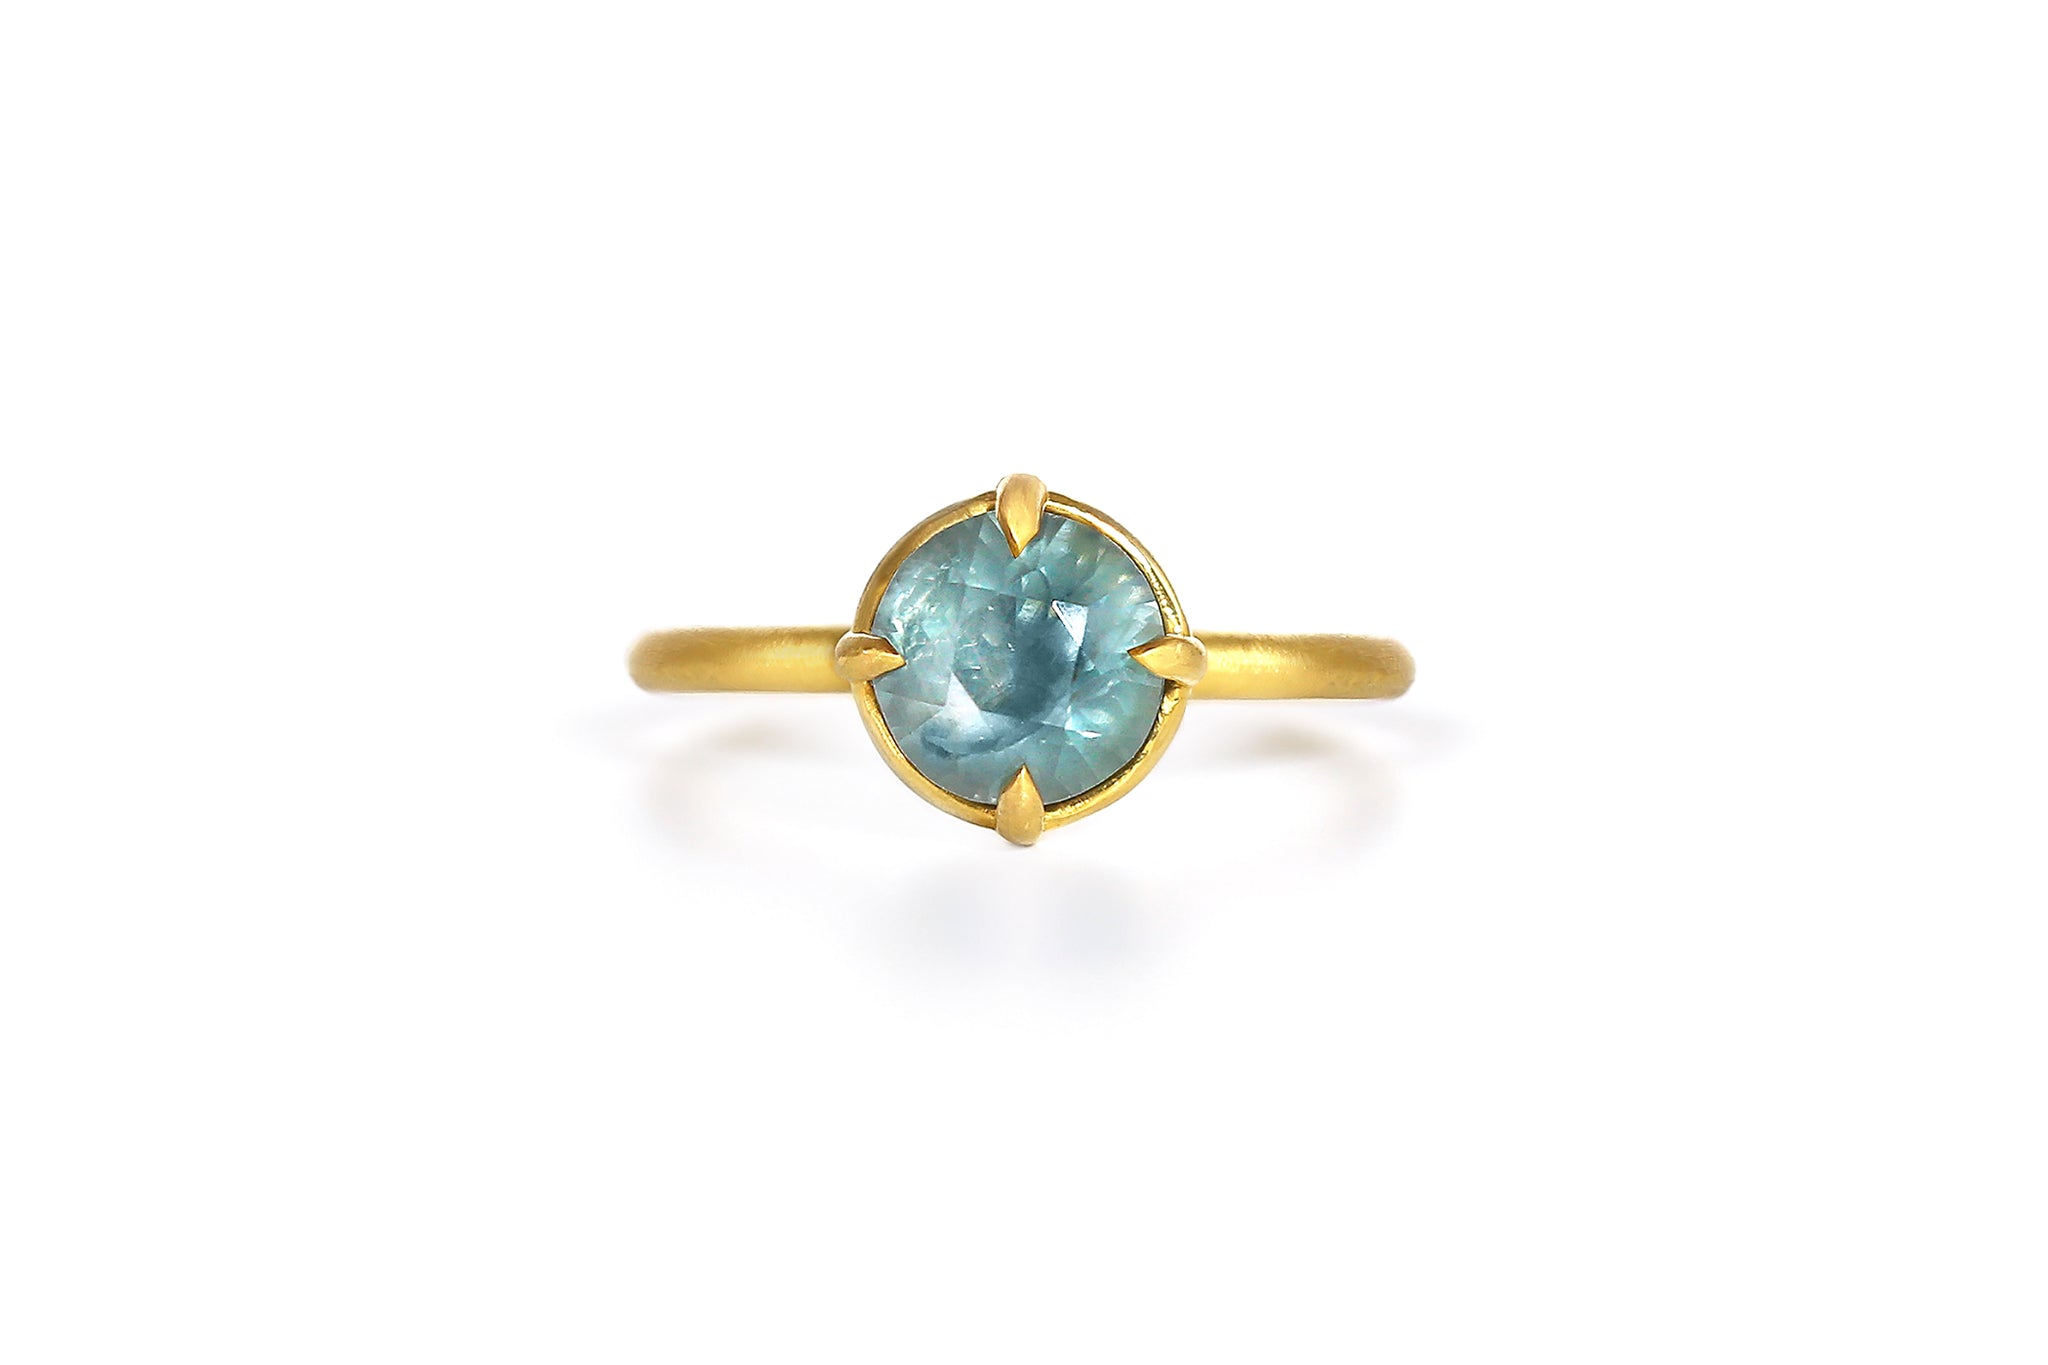 Montana Sapphire Ahinoam 22k Recycled Gold Ring - S. Kind & Co